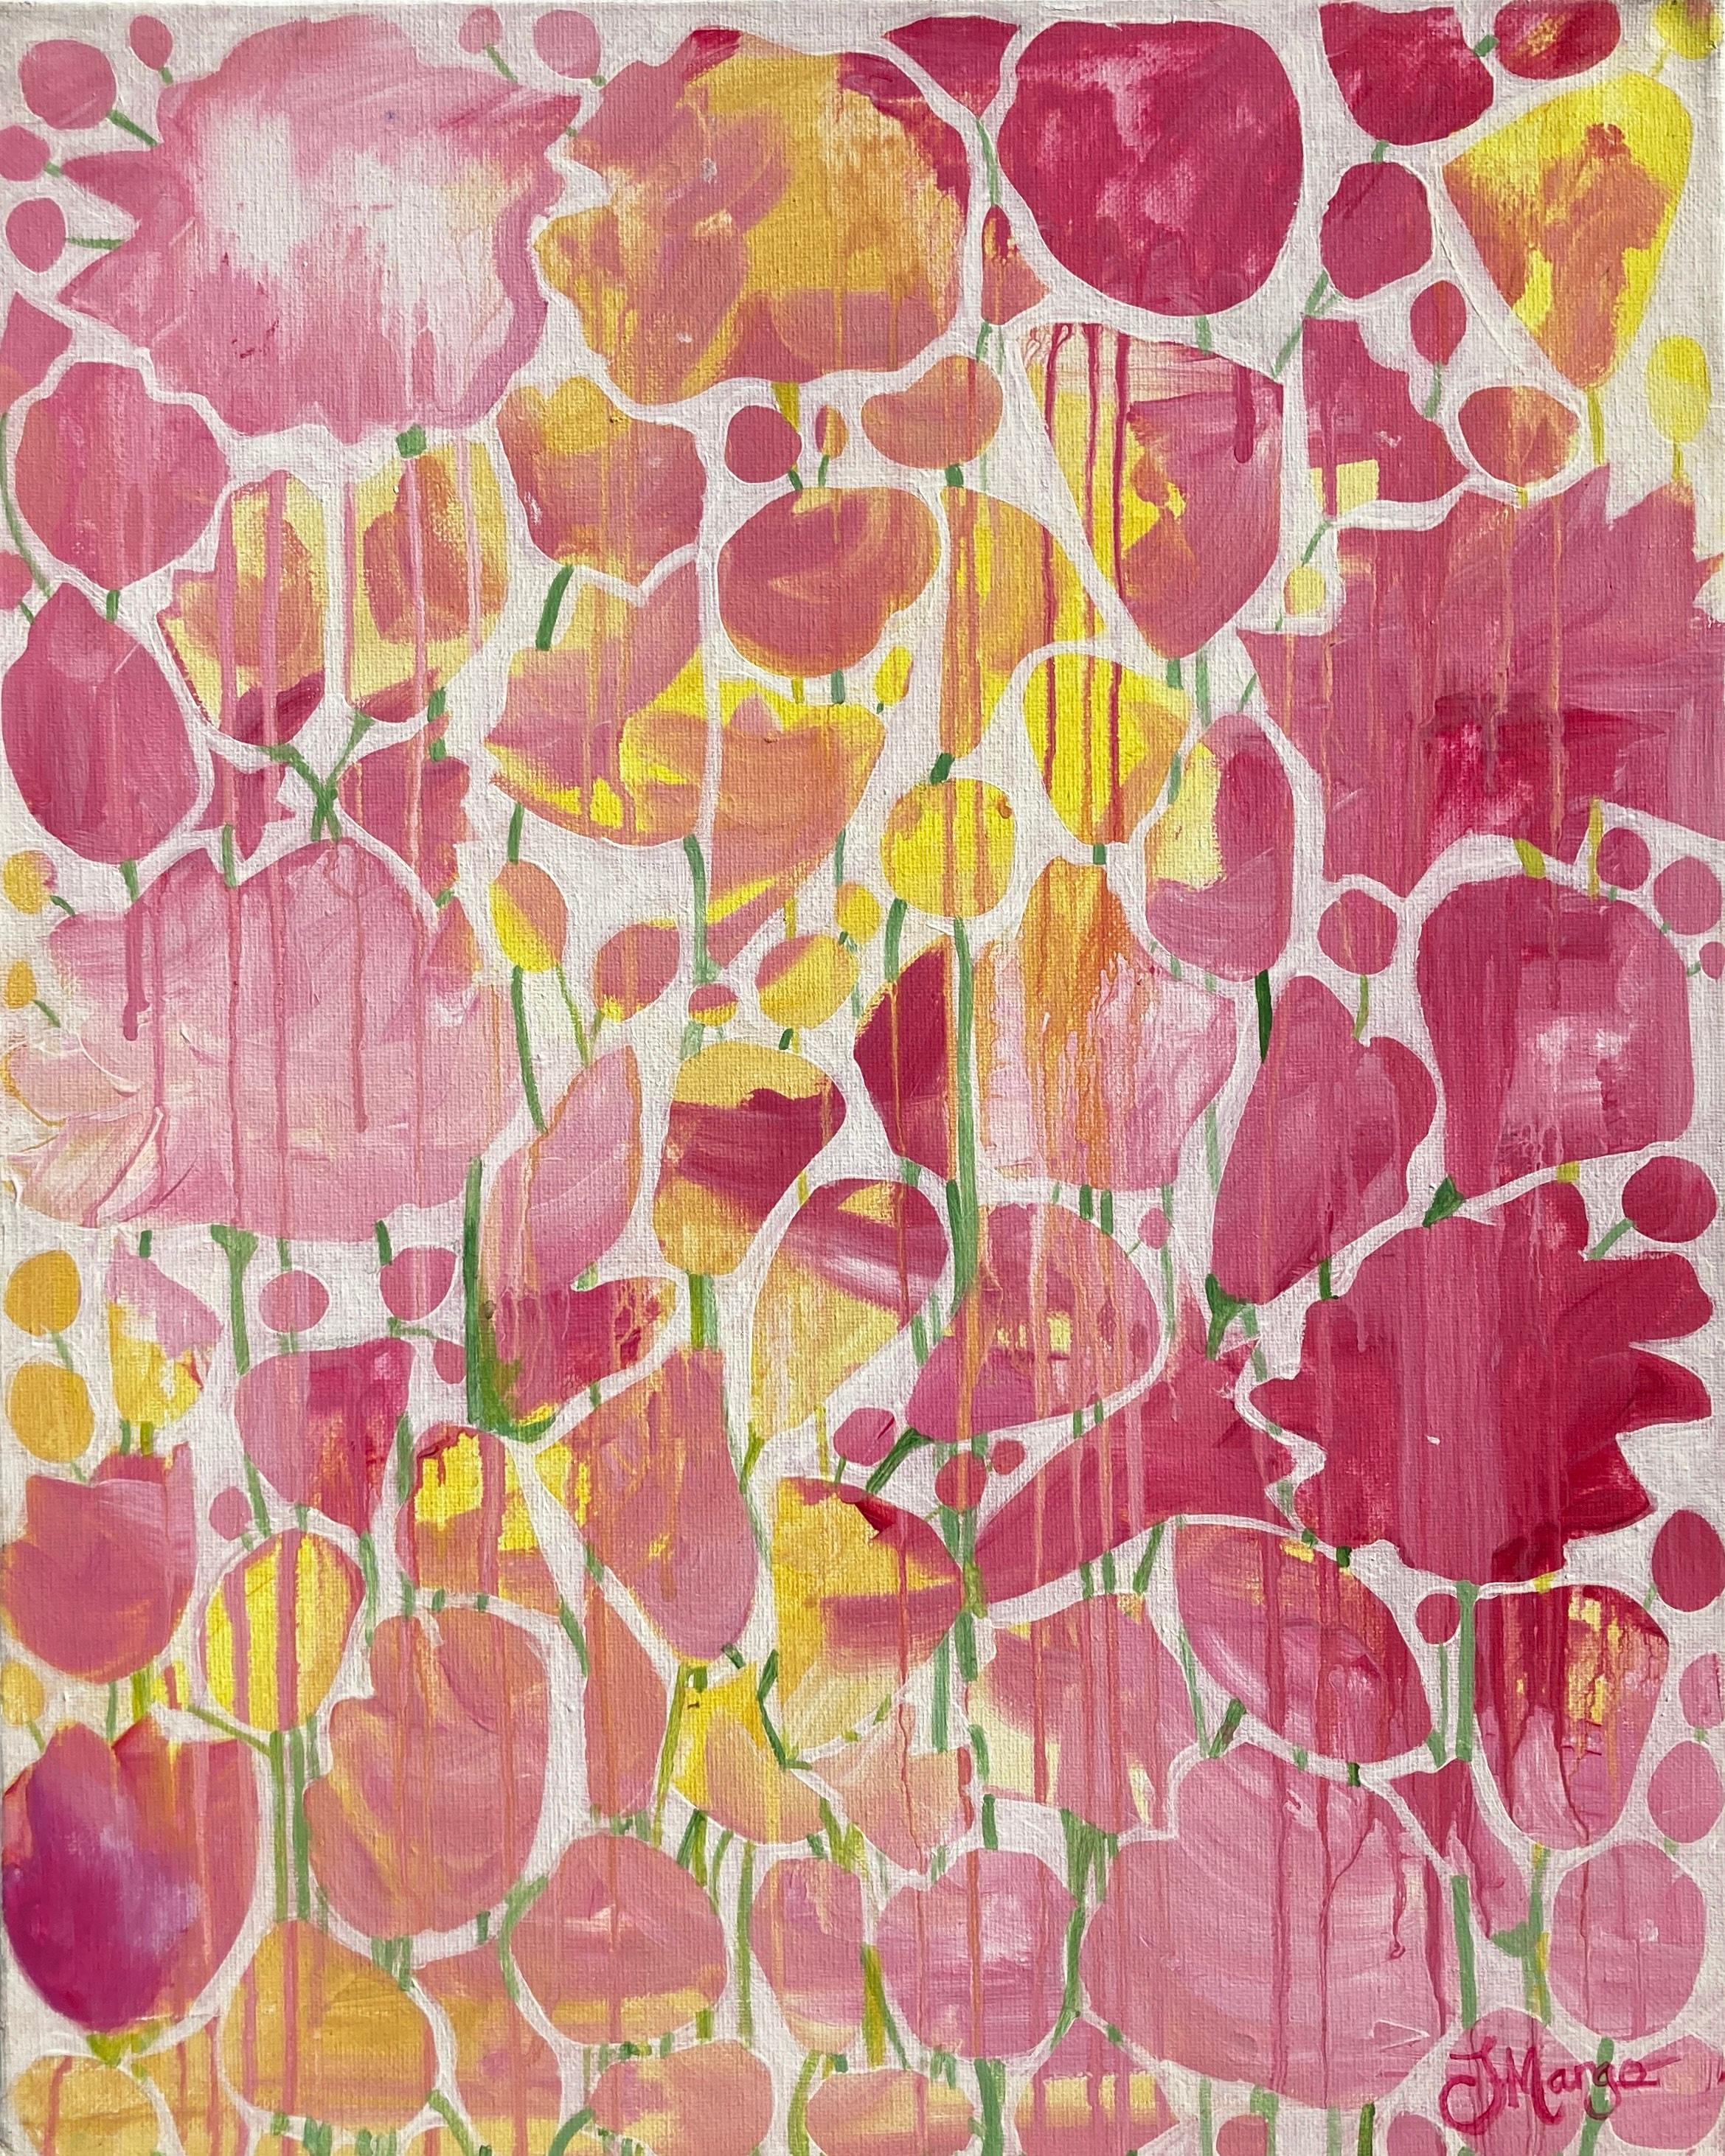 <p>Artist Comments<br />An abstract garden of brilliant pink and yellow flowers, dripping with rain. Joyanna says the painting is a nod to Barbara Streisand's song Don't Rain on My Parade.  Her signature 'negative space' floral scenes are intended